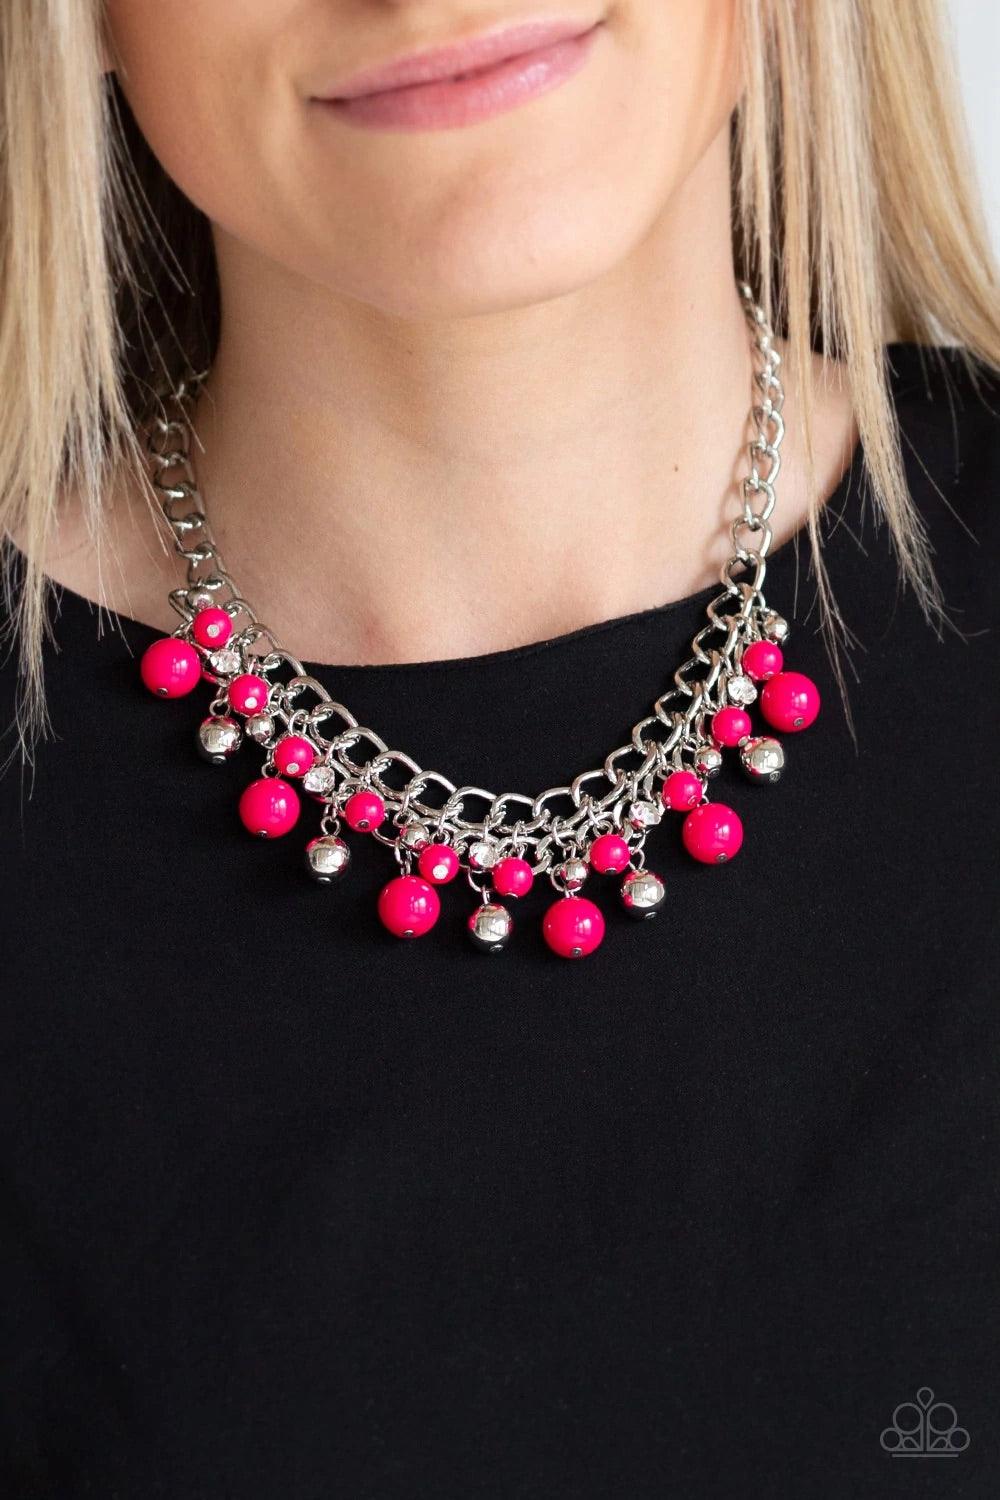 Paparazzi Accessories The Bride to BEAD - Pink Varying in size, a collection of vivacious pink and shiny silver beads swing from the bottom of interlocking silver chains below the collar. A row of glassy white rhinestones are sprinkled along the colorful